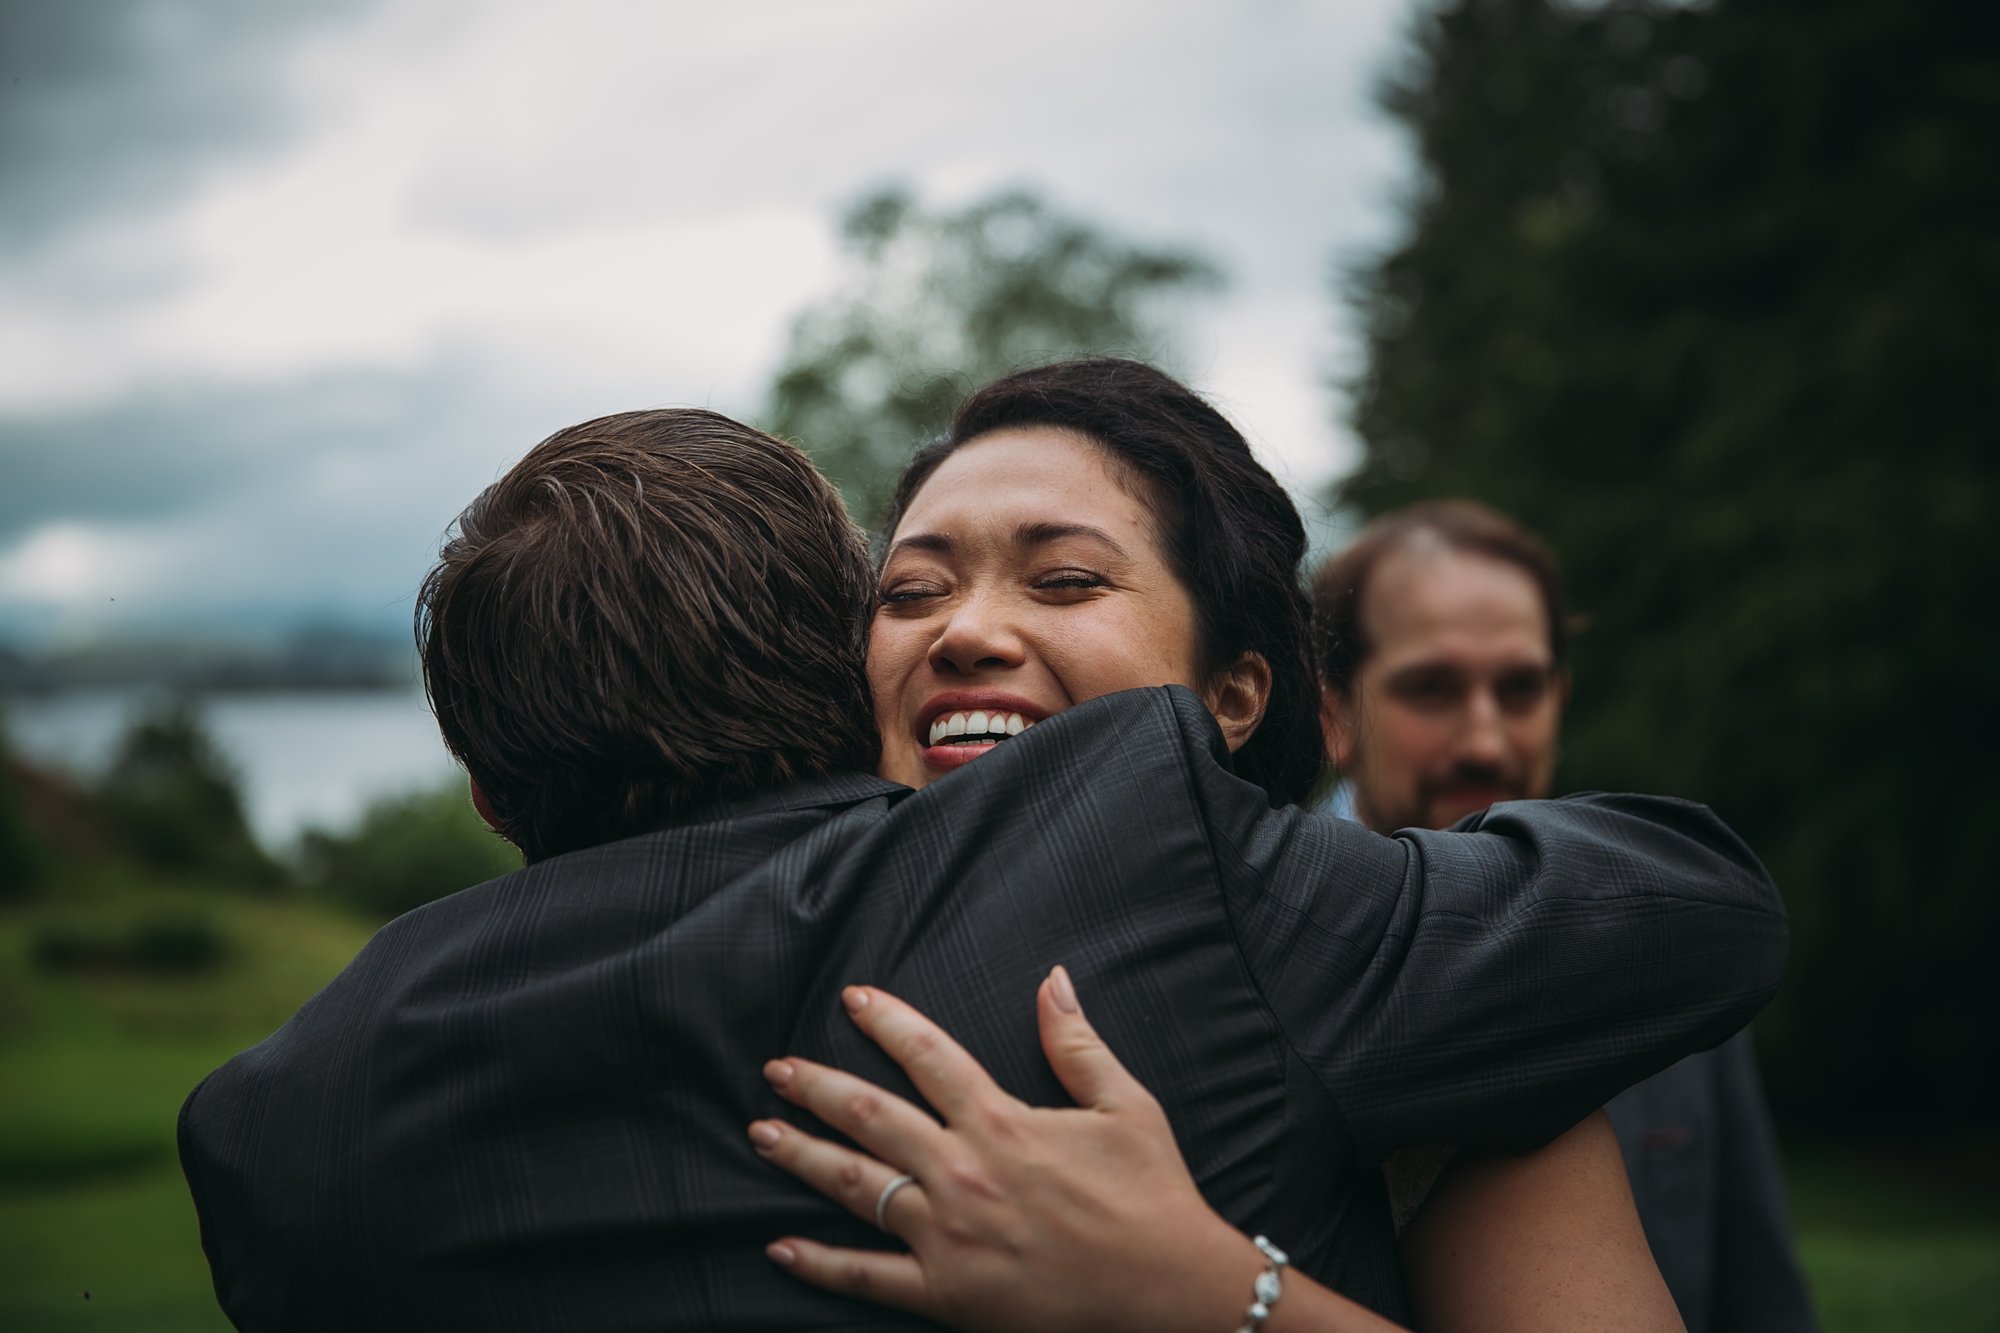 A bride gets a good hug after getting married in our 2017 best wedding photographs blog